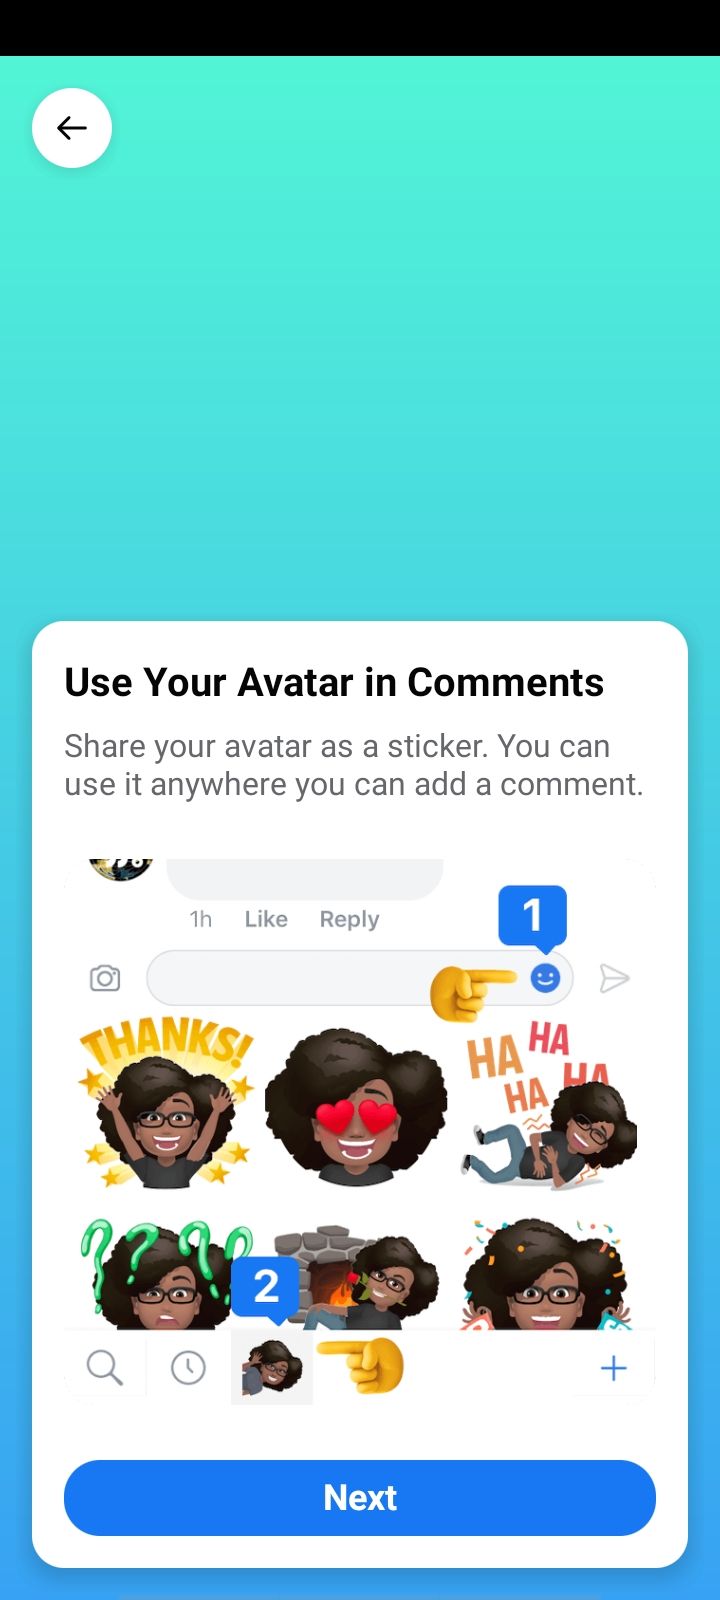 Facebook Showing How To Use An Avatar In Comments